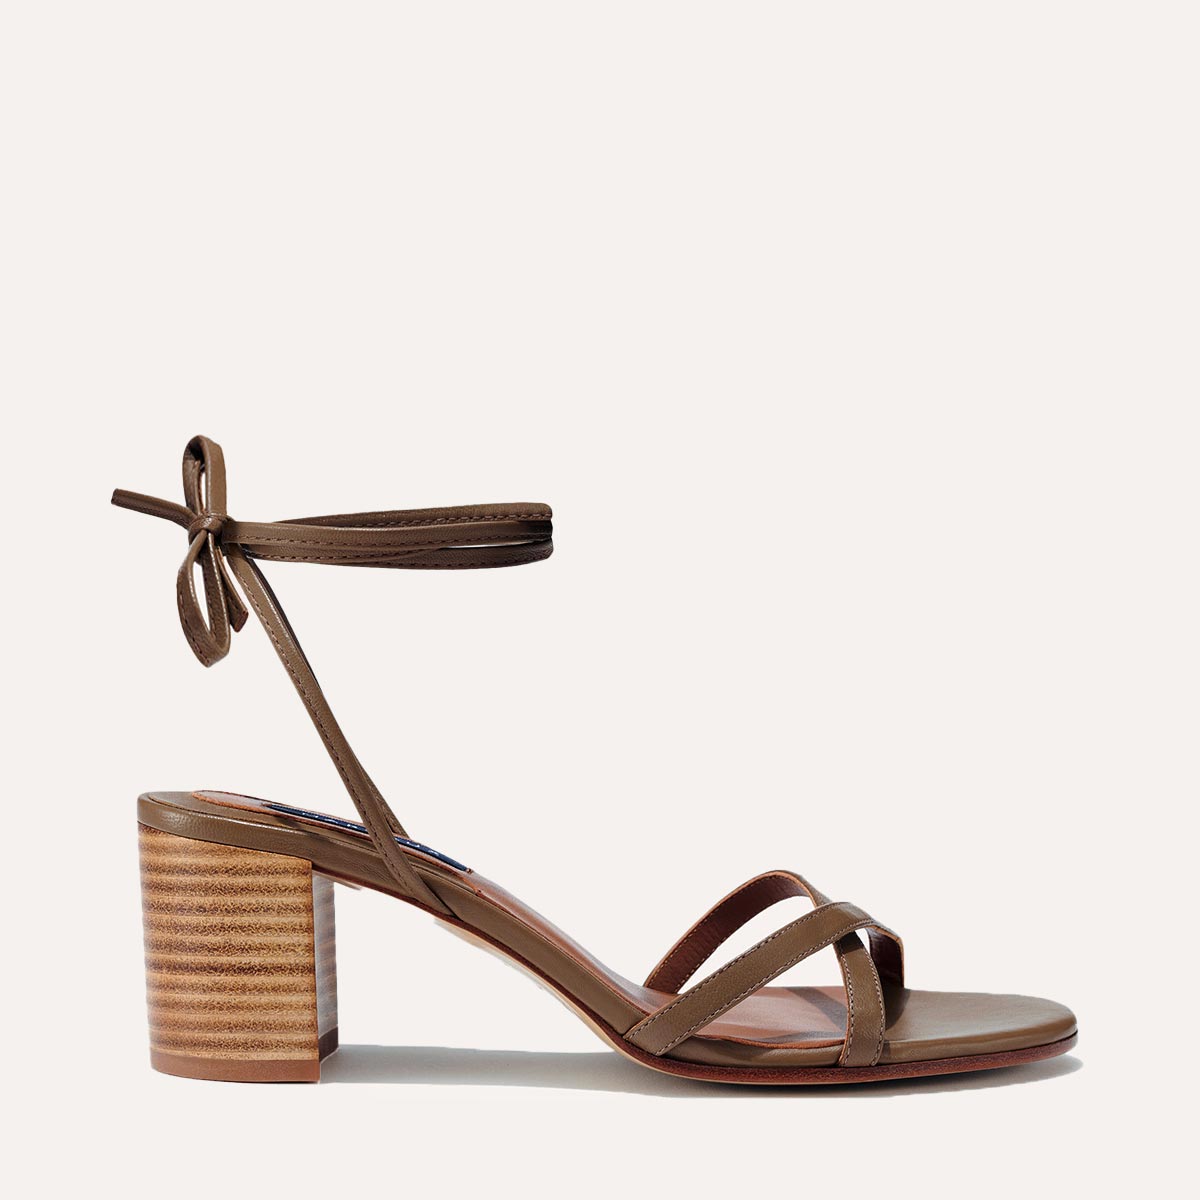 Margaux's strappy Soho Sandal with ankle ties, made in Spain from soft, olive brown Italian nappa leather